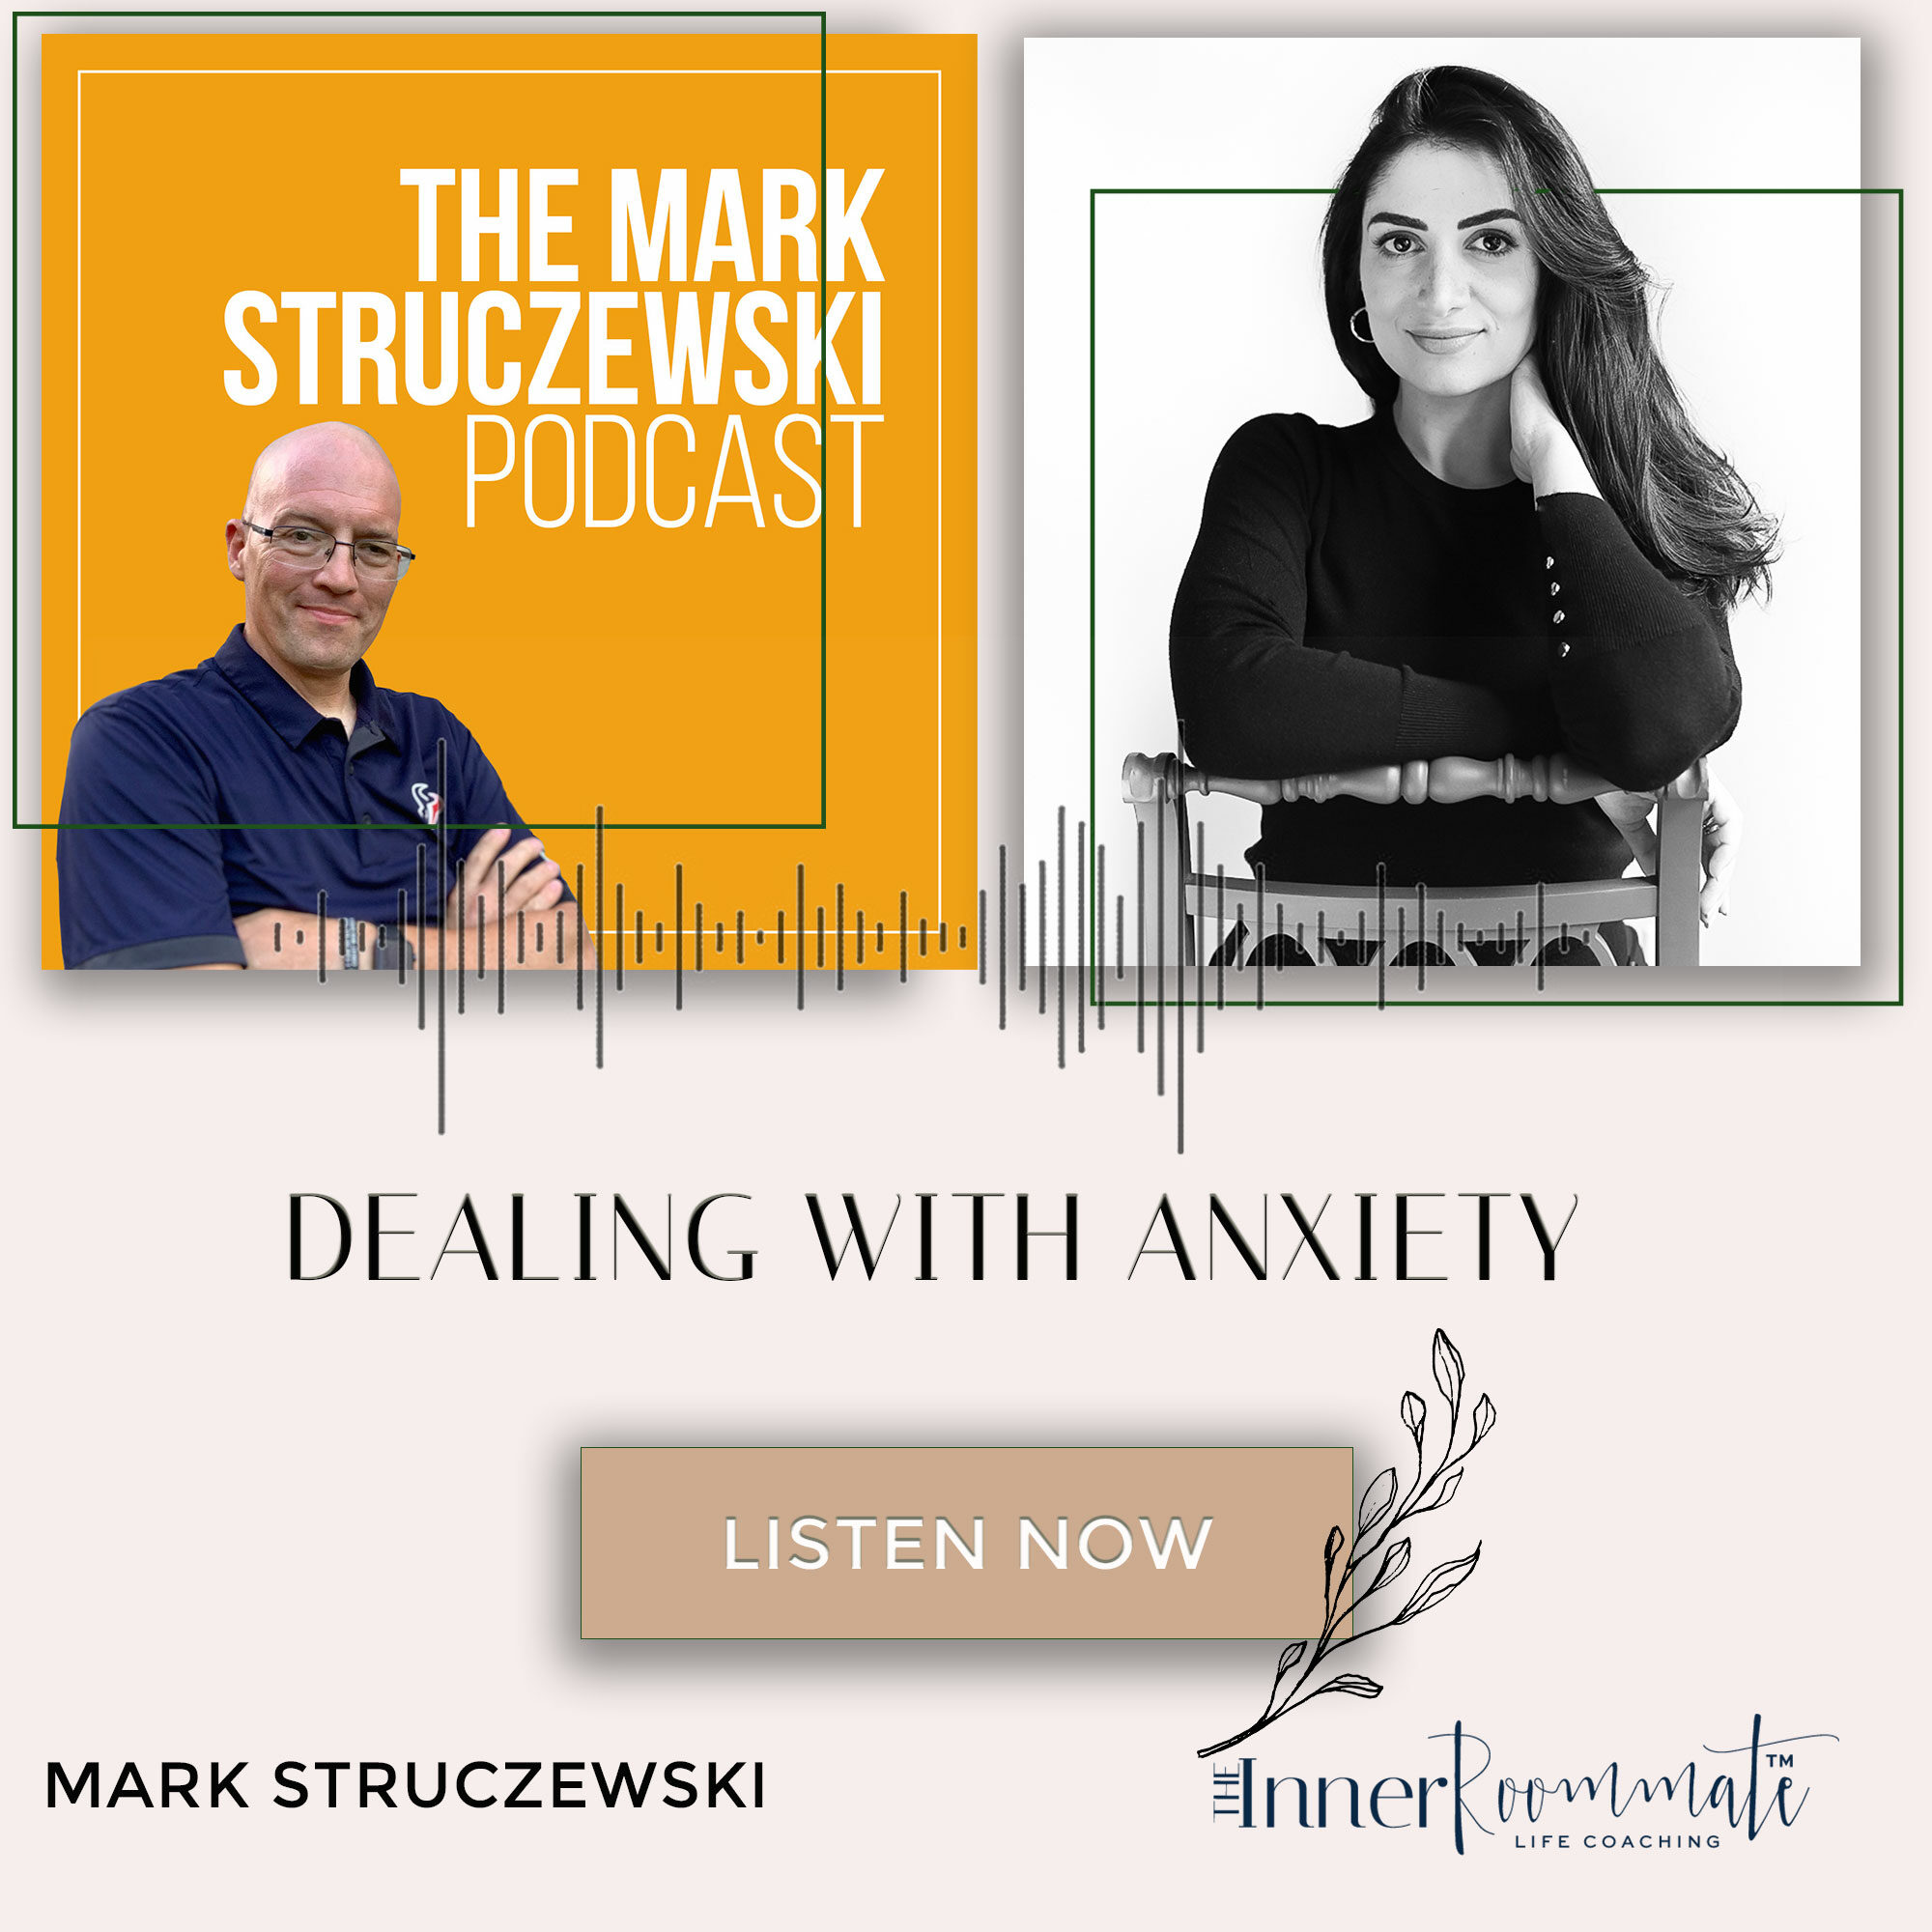 Mark and I discuss dealing with anxiety, how the media is not good for you, mindset, social media and anxiety, commit to healing, and so much more!